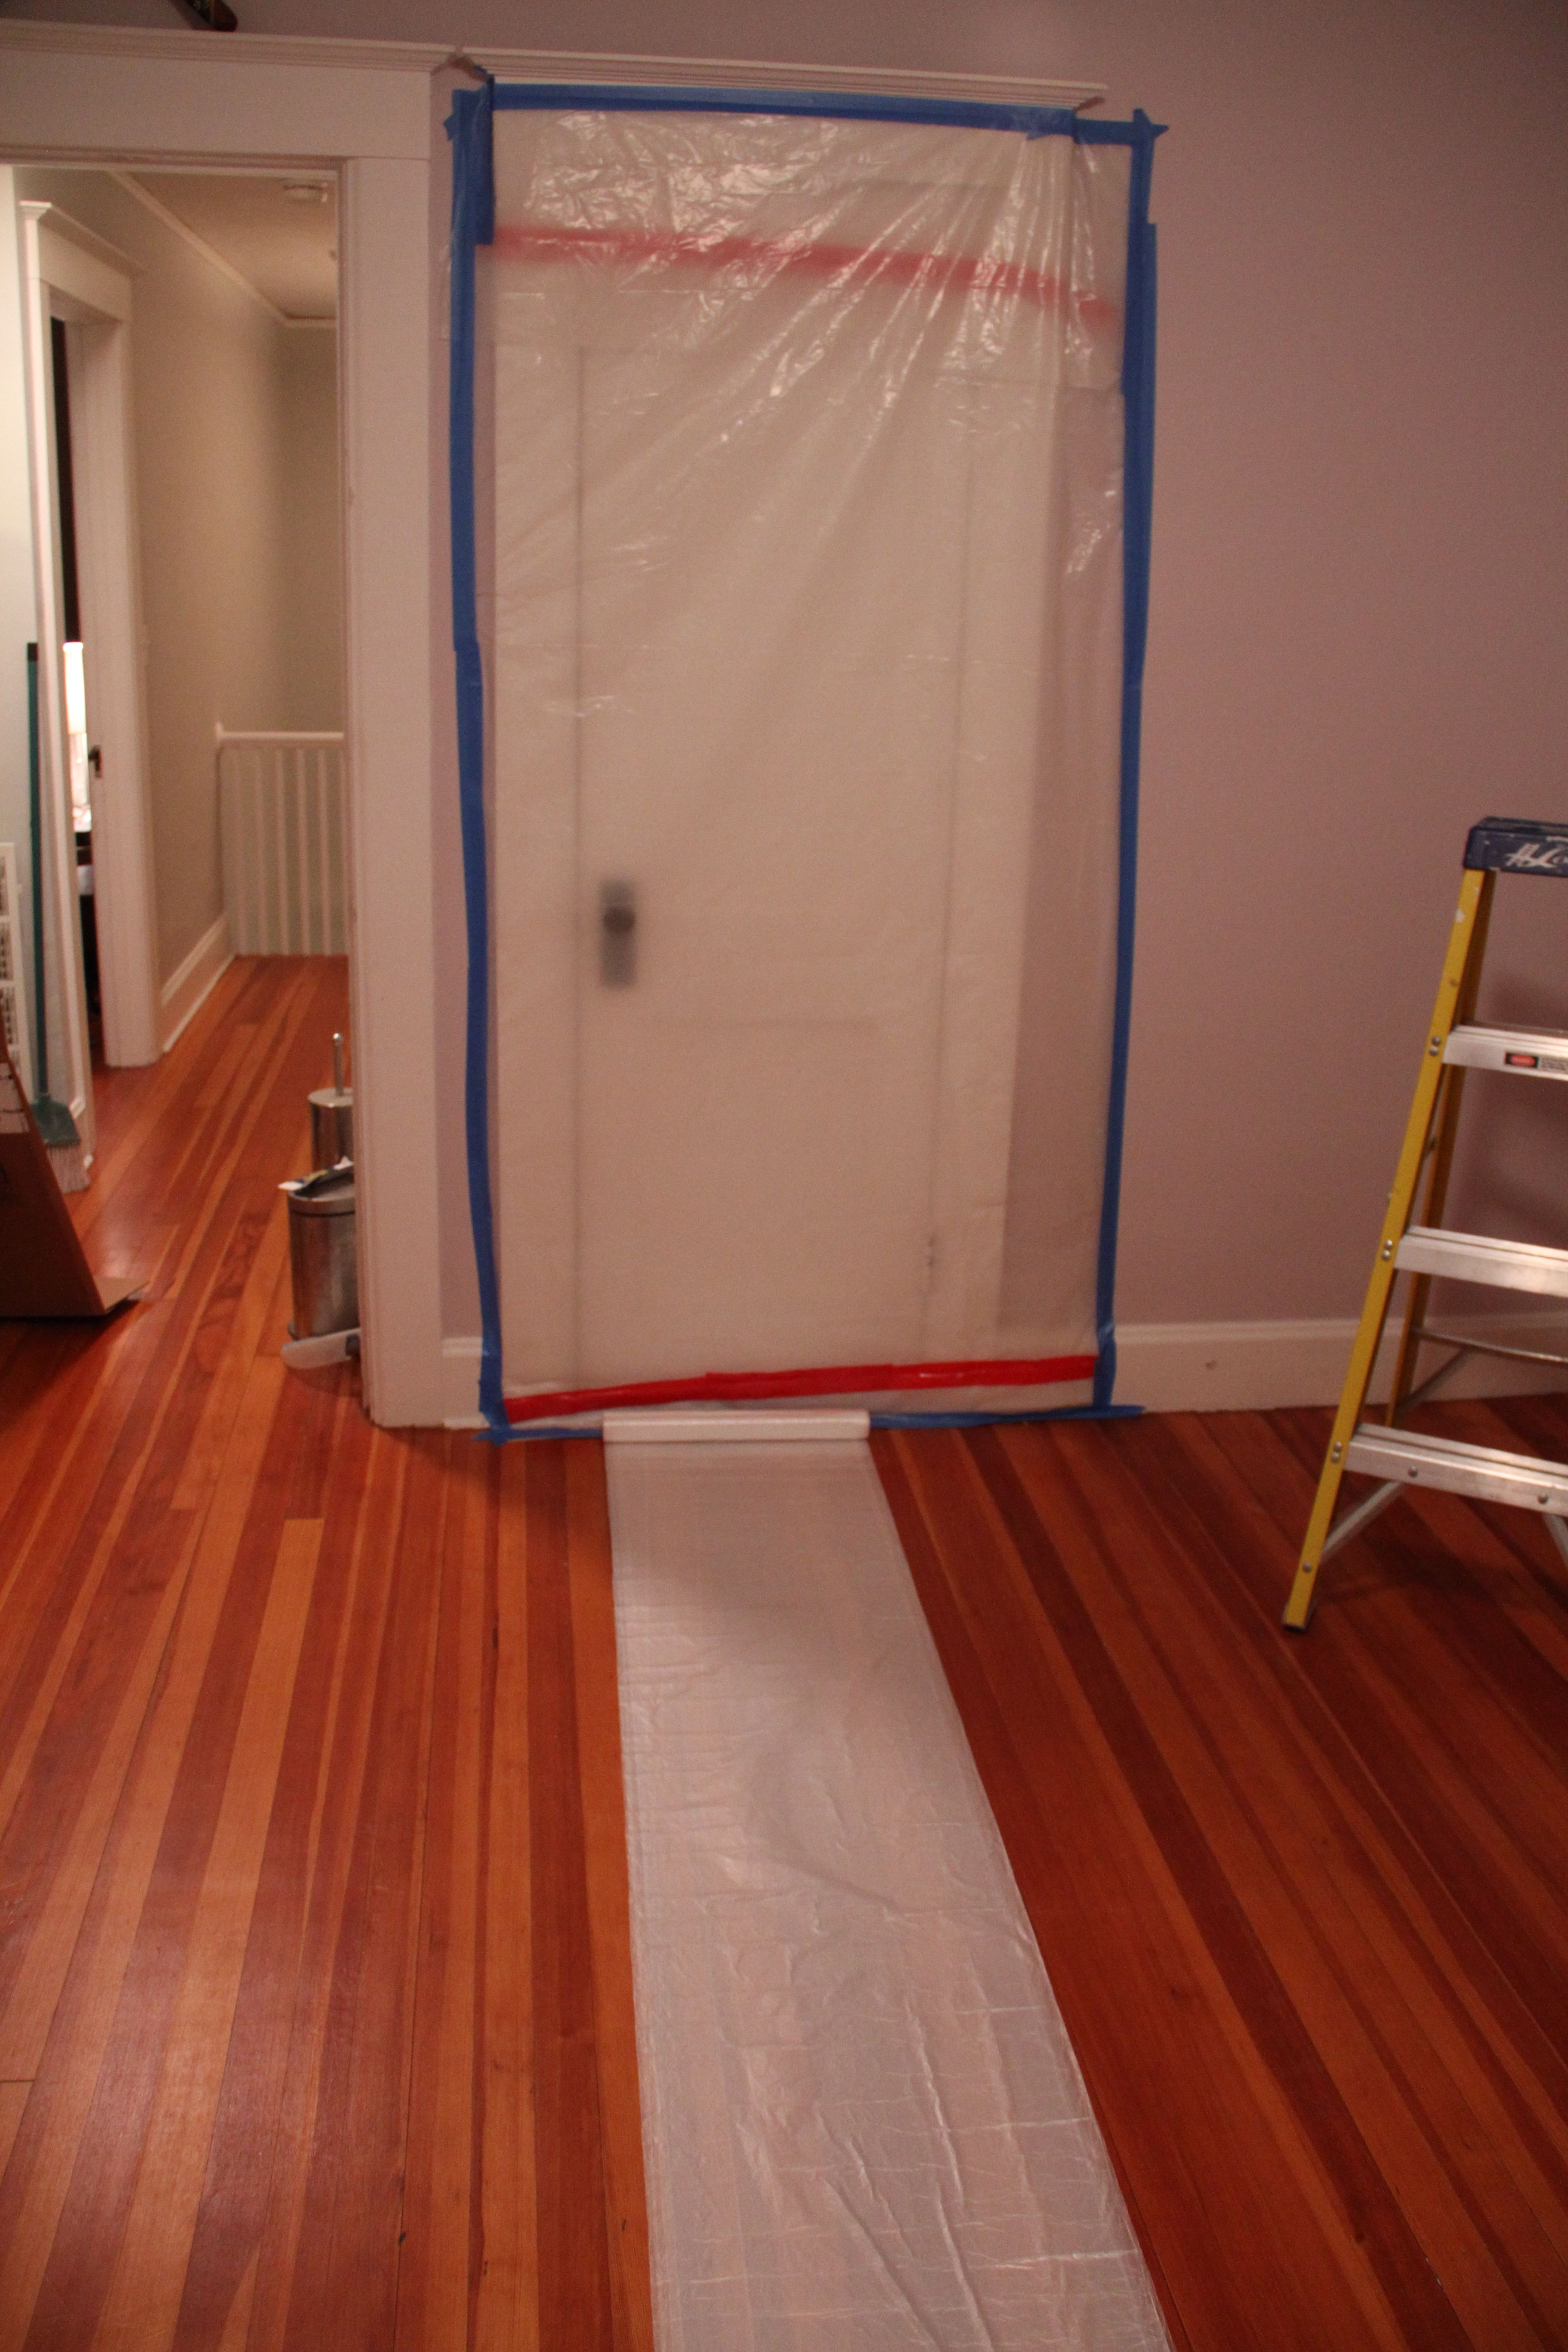 Step one: plastic. Lightweight painters' plastic should cover the floor. The room is small, so the 10' width meant we just had to cut it to length.